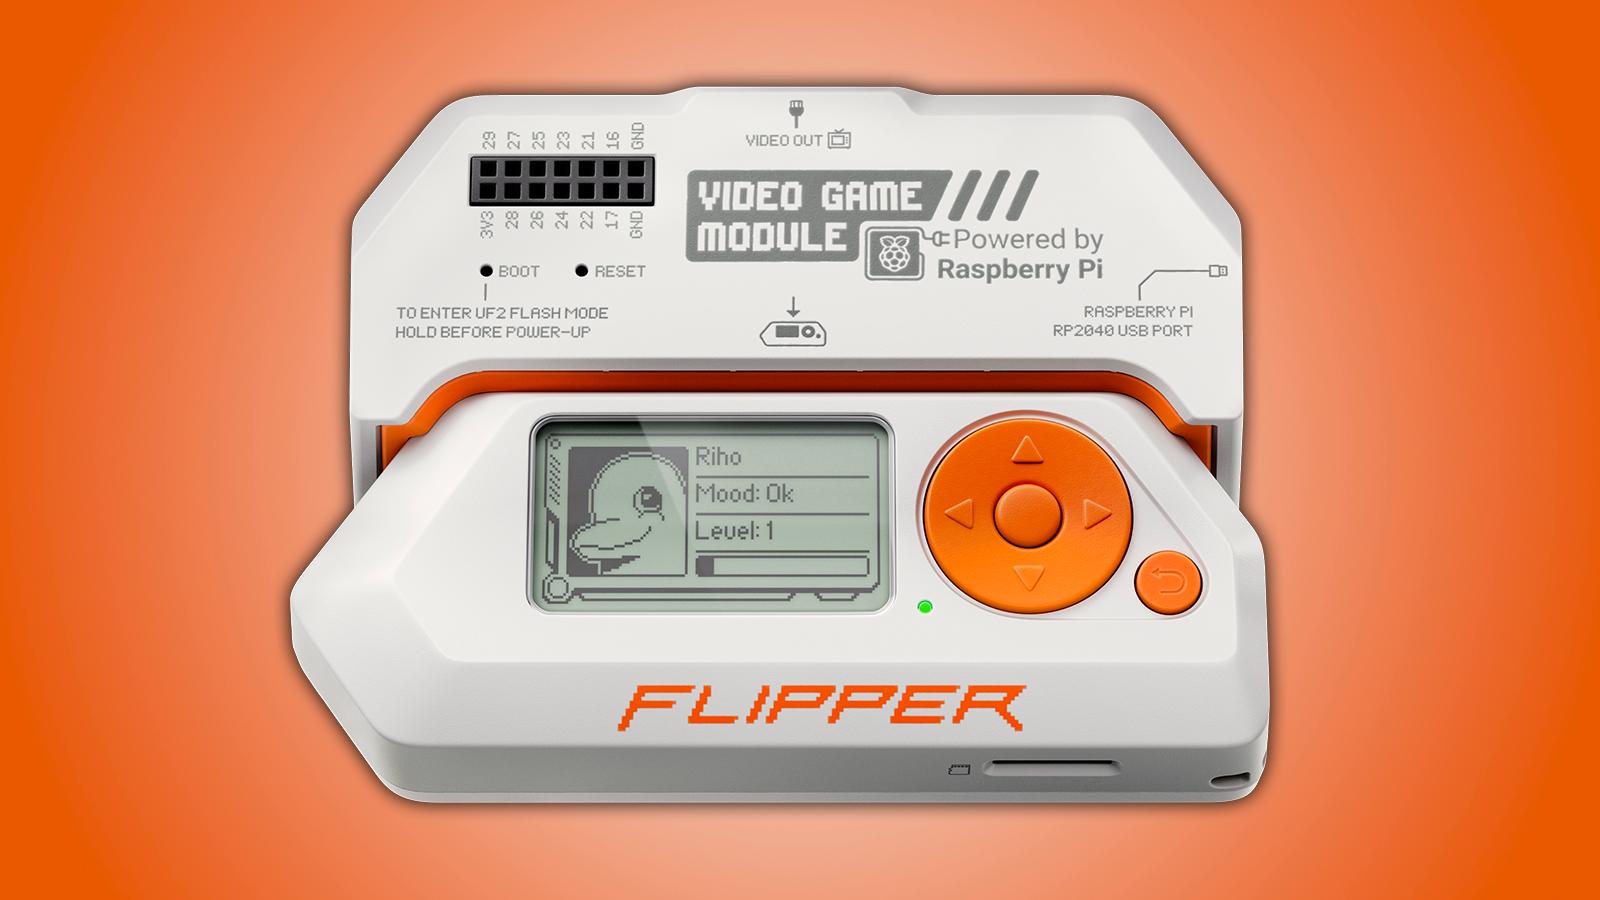 Flipper Zero joins forces with Raspberry Pi for new Video Game